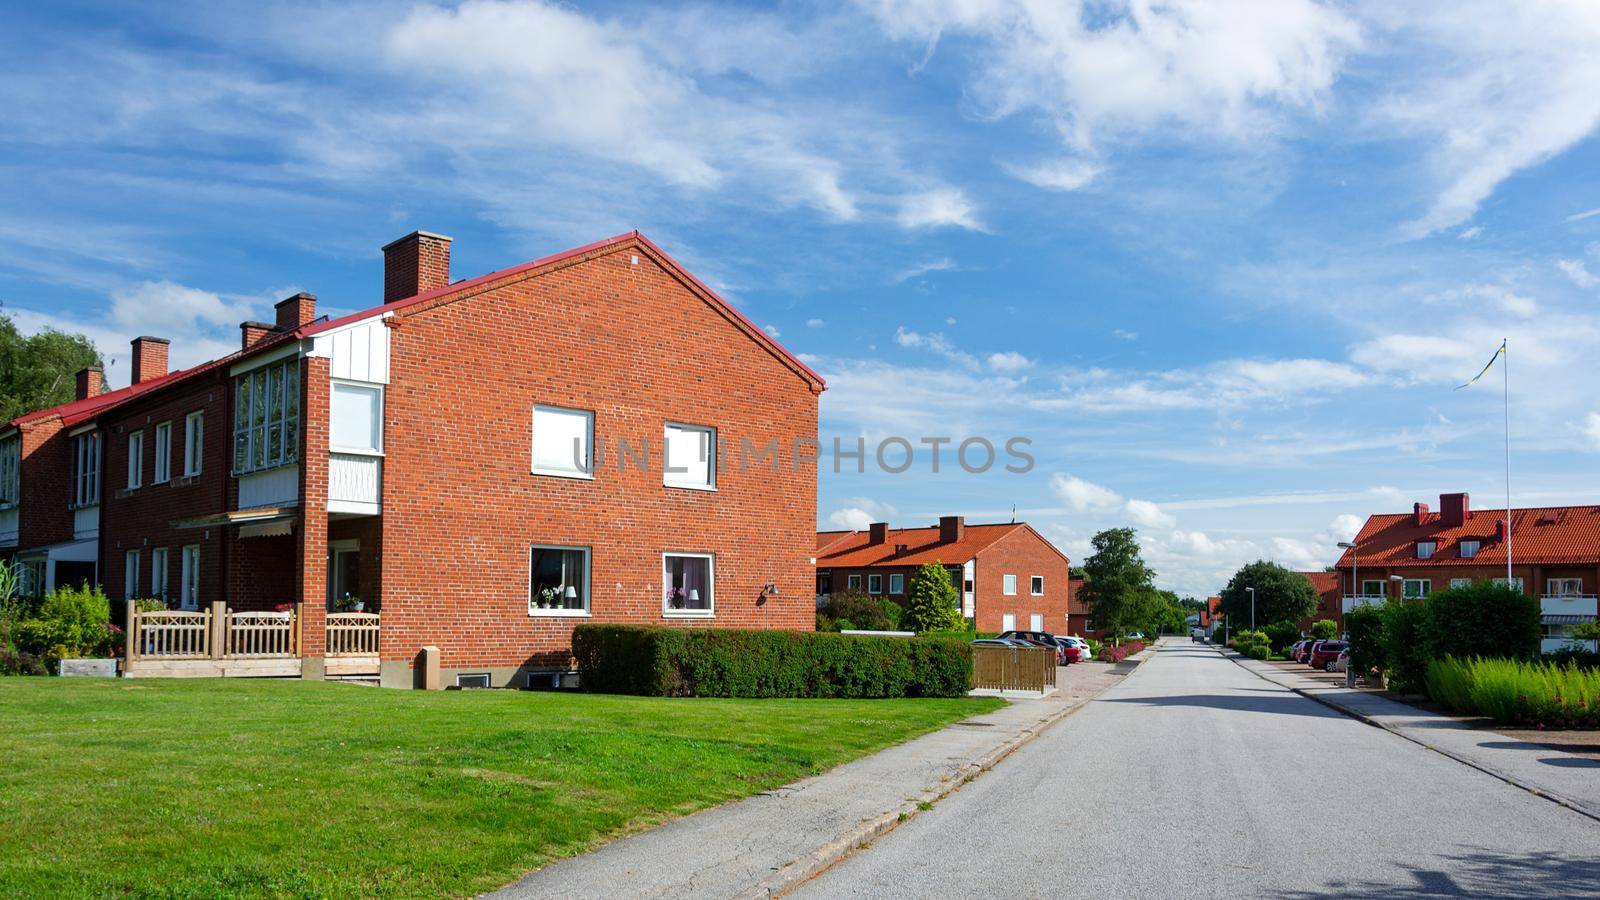 Veberod, Sweden - July 22, 2017:  Panoramic view of typical Swedish buildings multi-family houses in a small town and on the outskirts of the agglomeration.